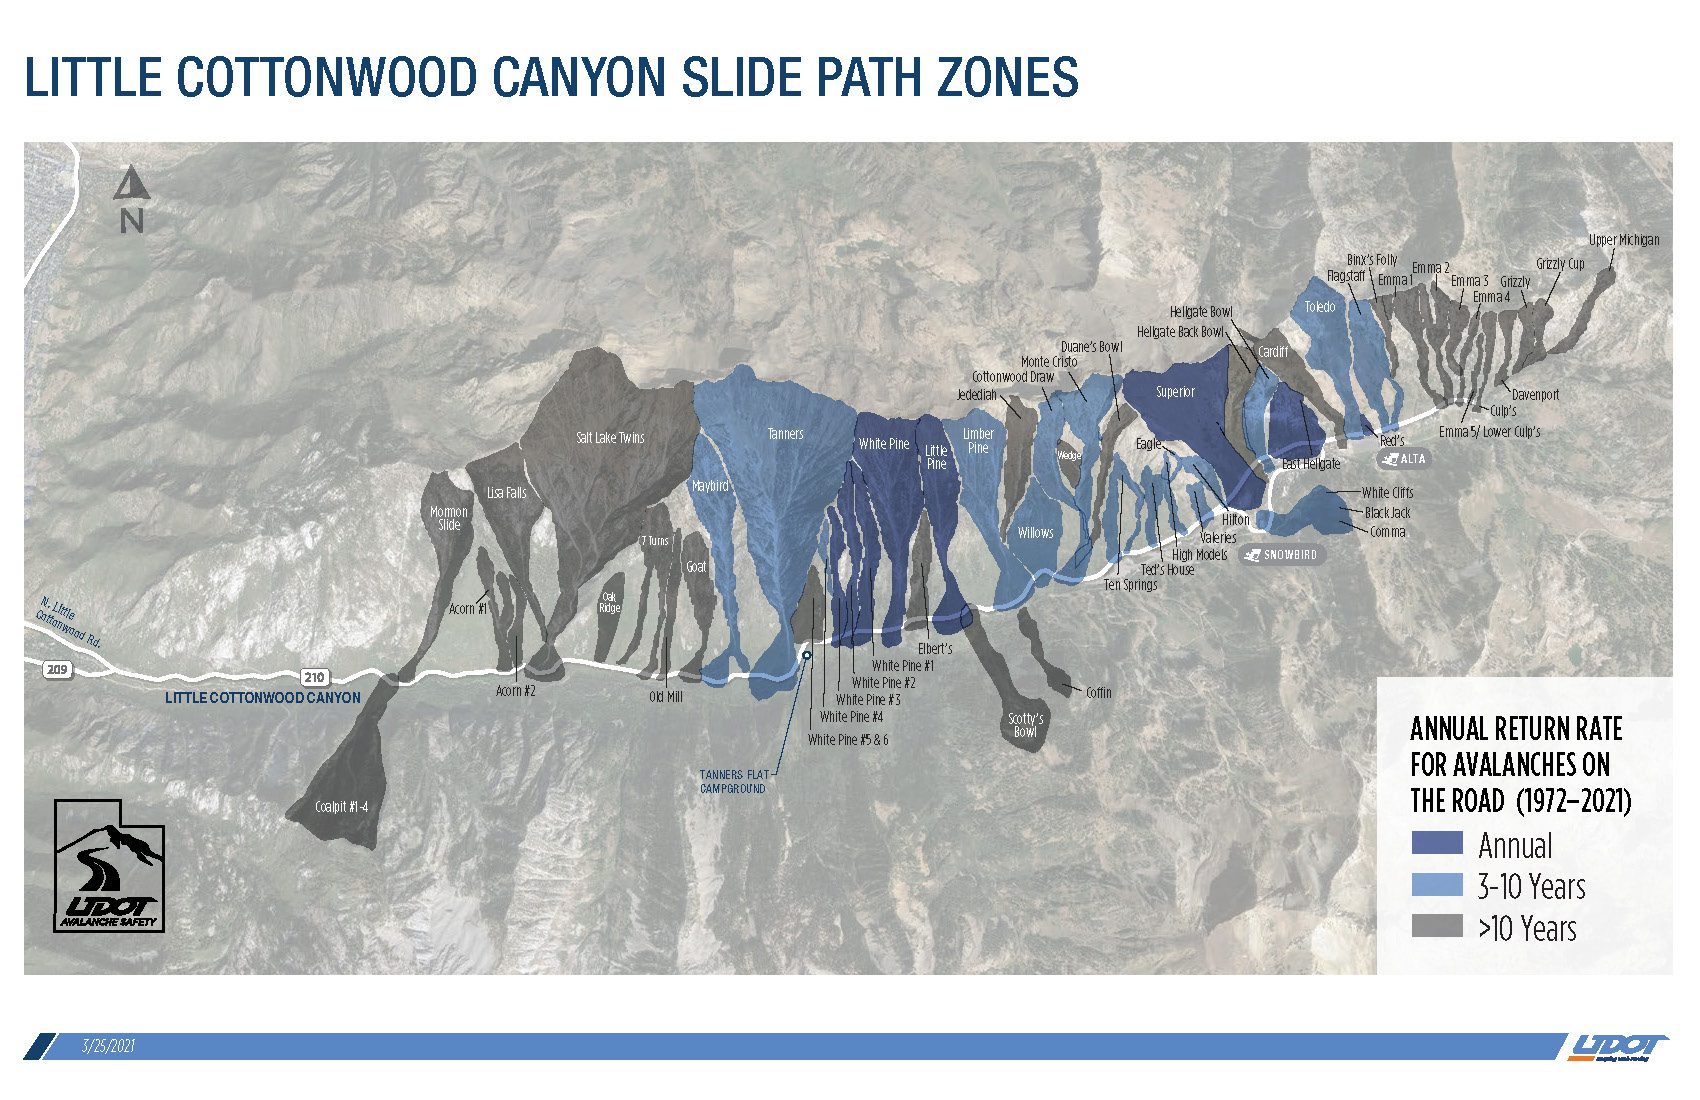 Potential avalanche areas in Little Cottonwood Canyon. 